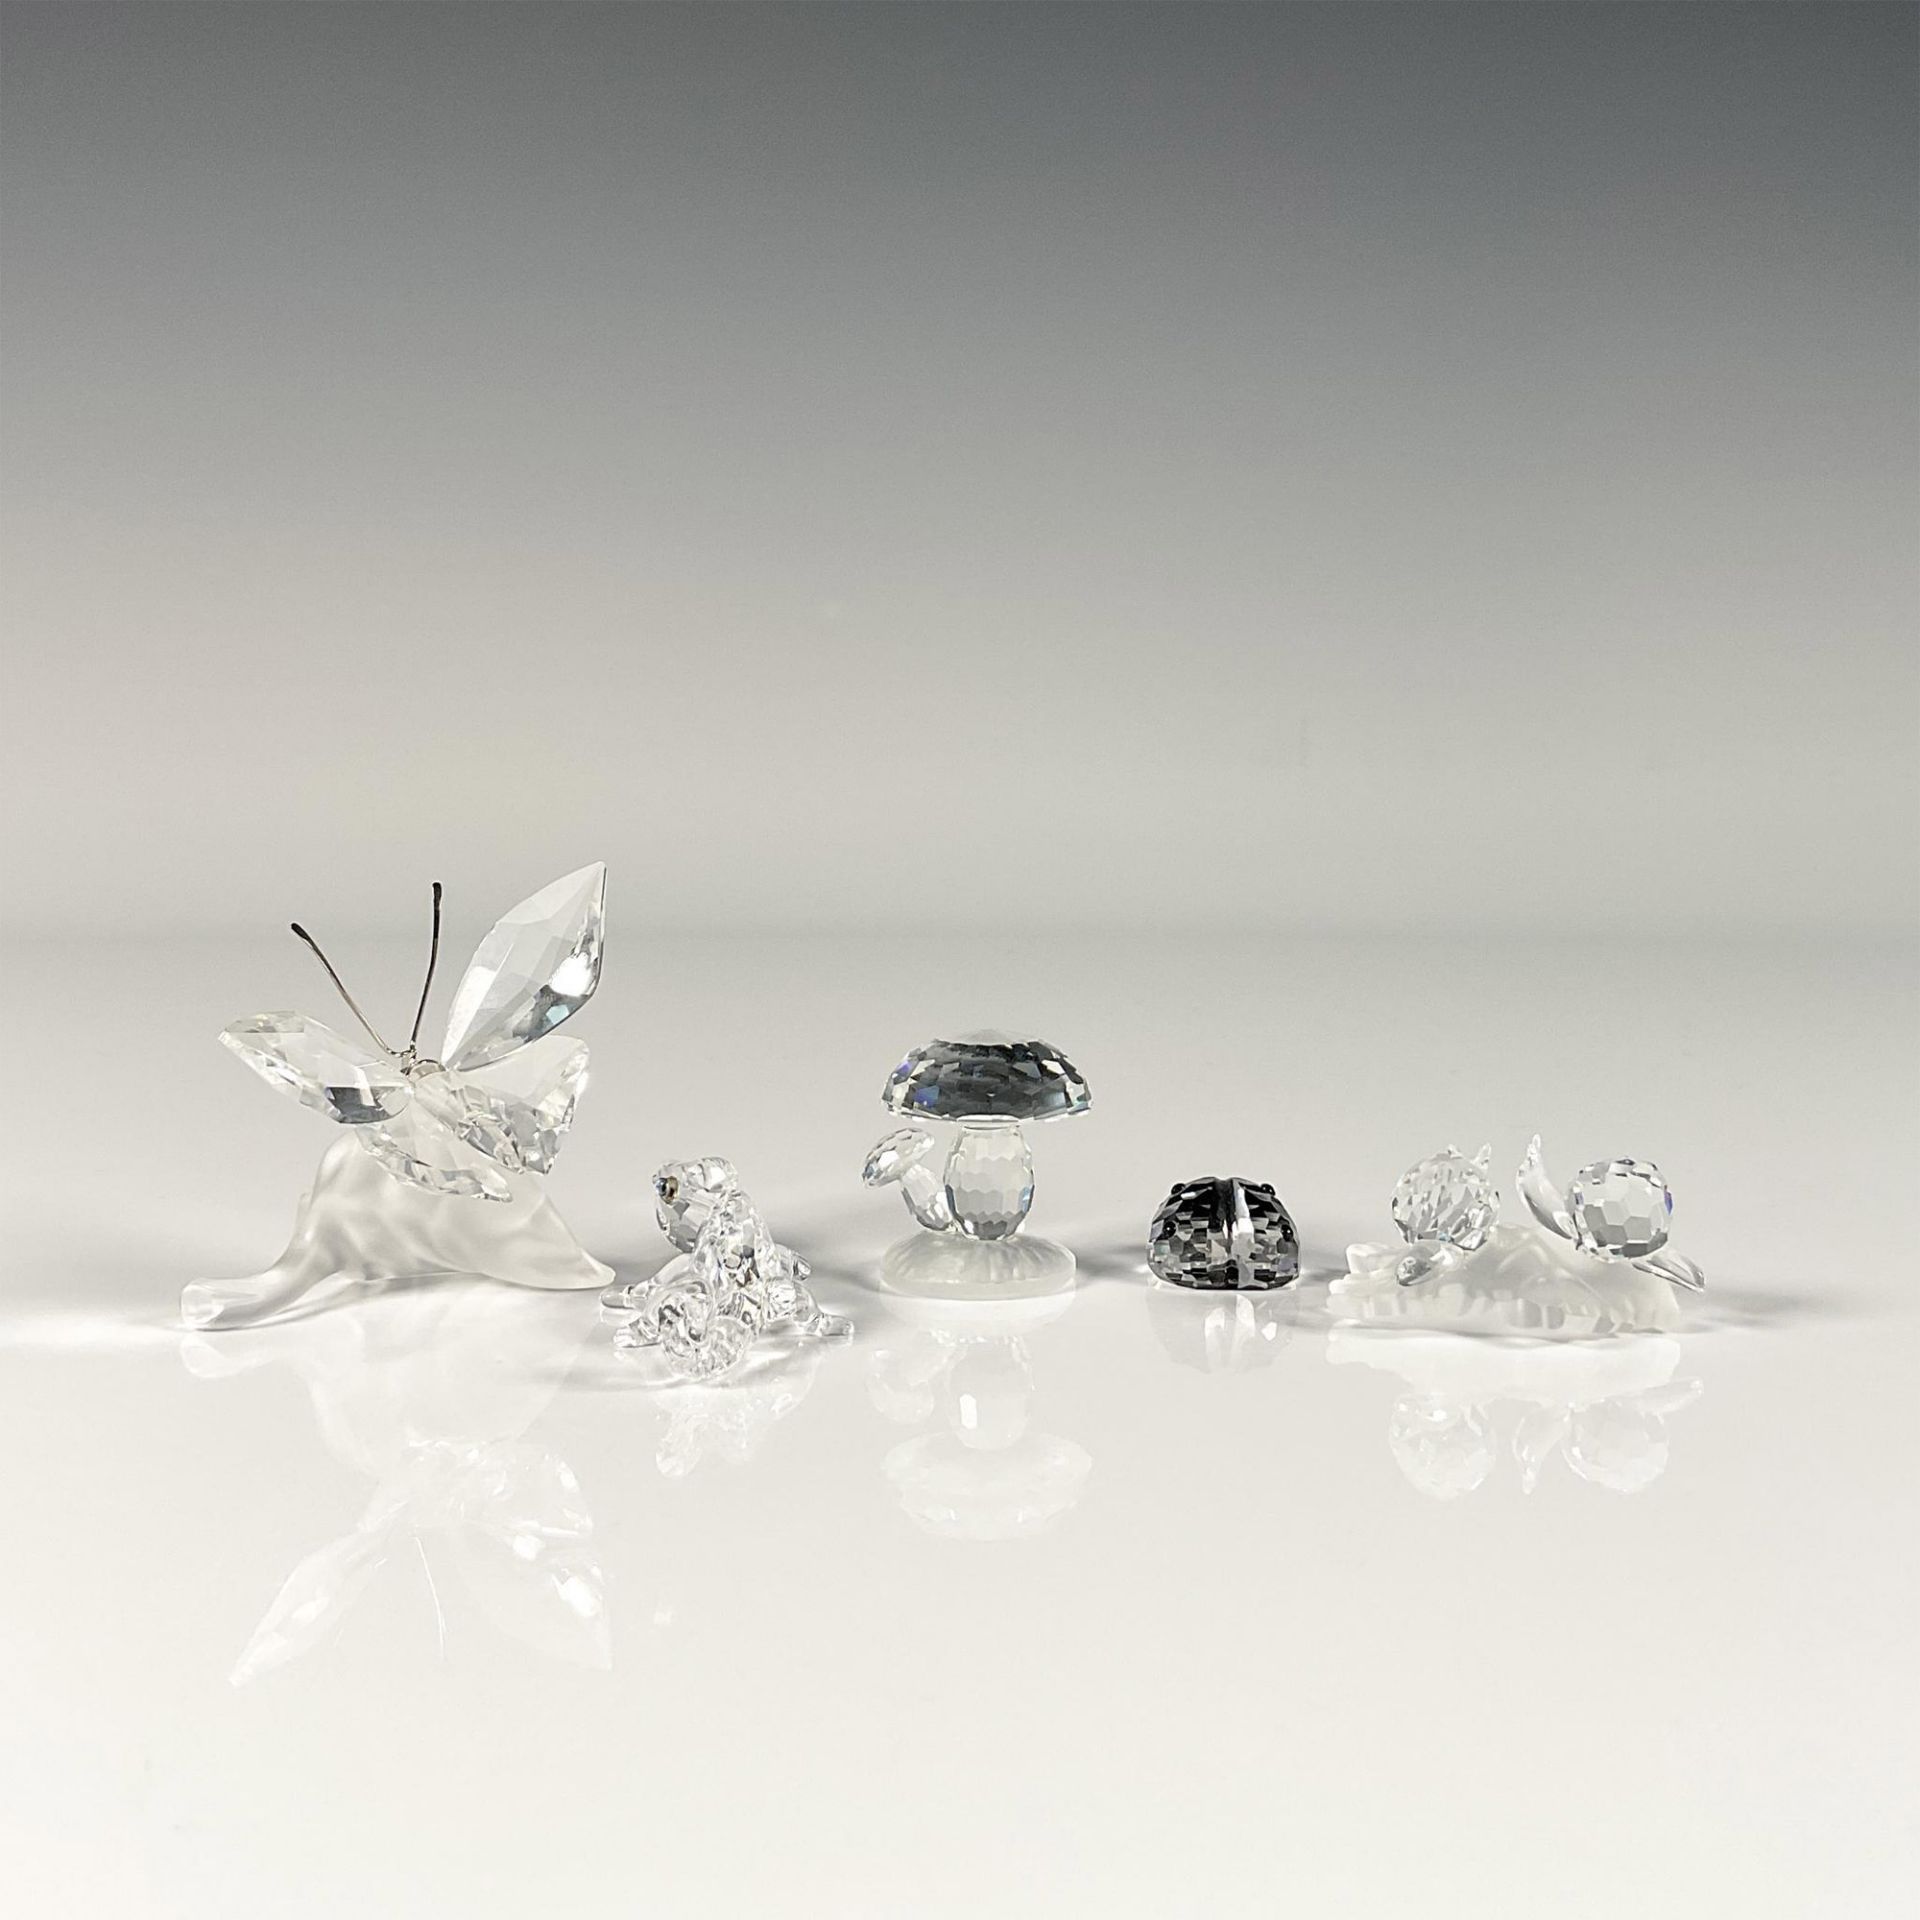 5pc Swarovski Crystal Insect and Reptile Figurines - Image 2 of 3